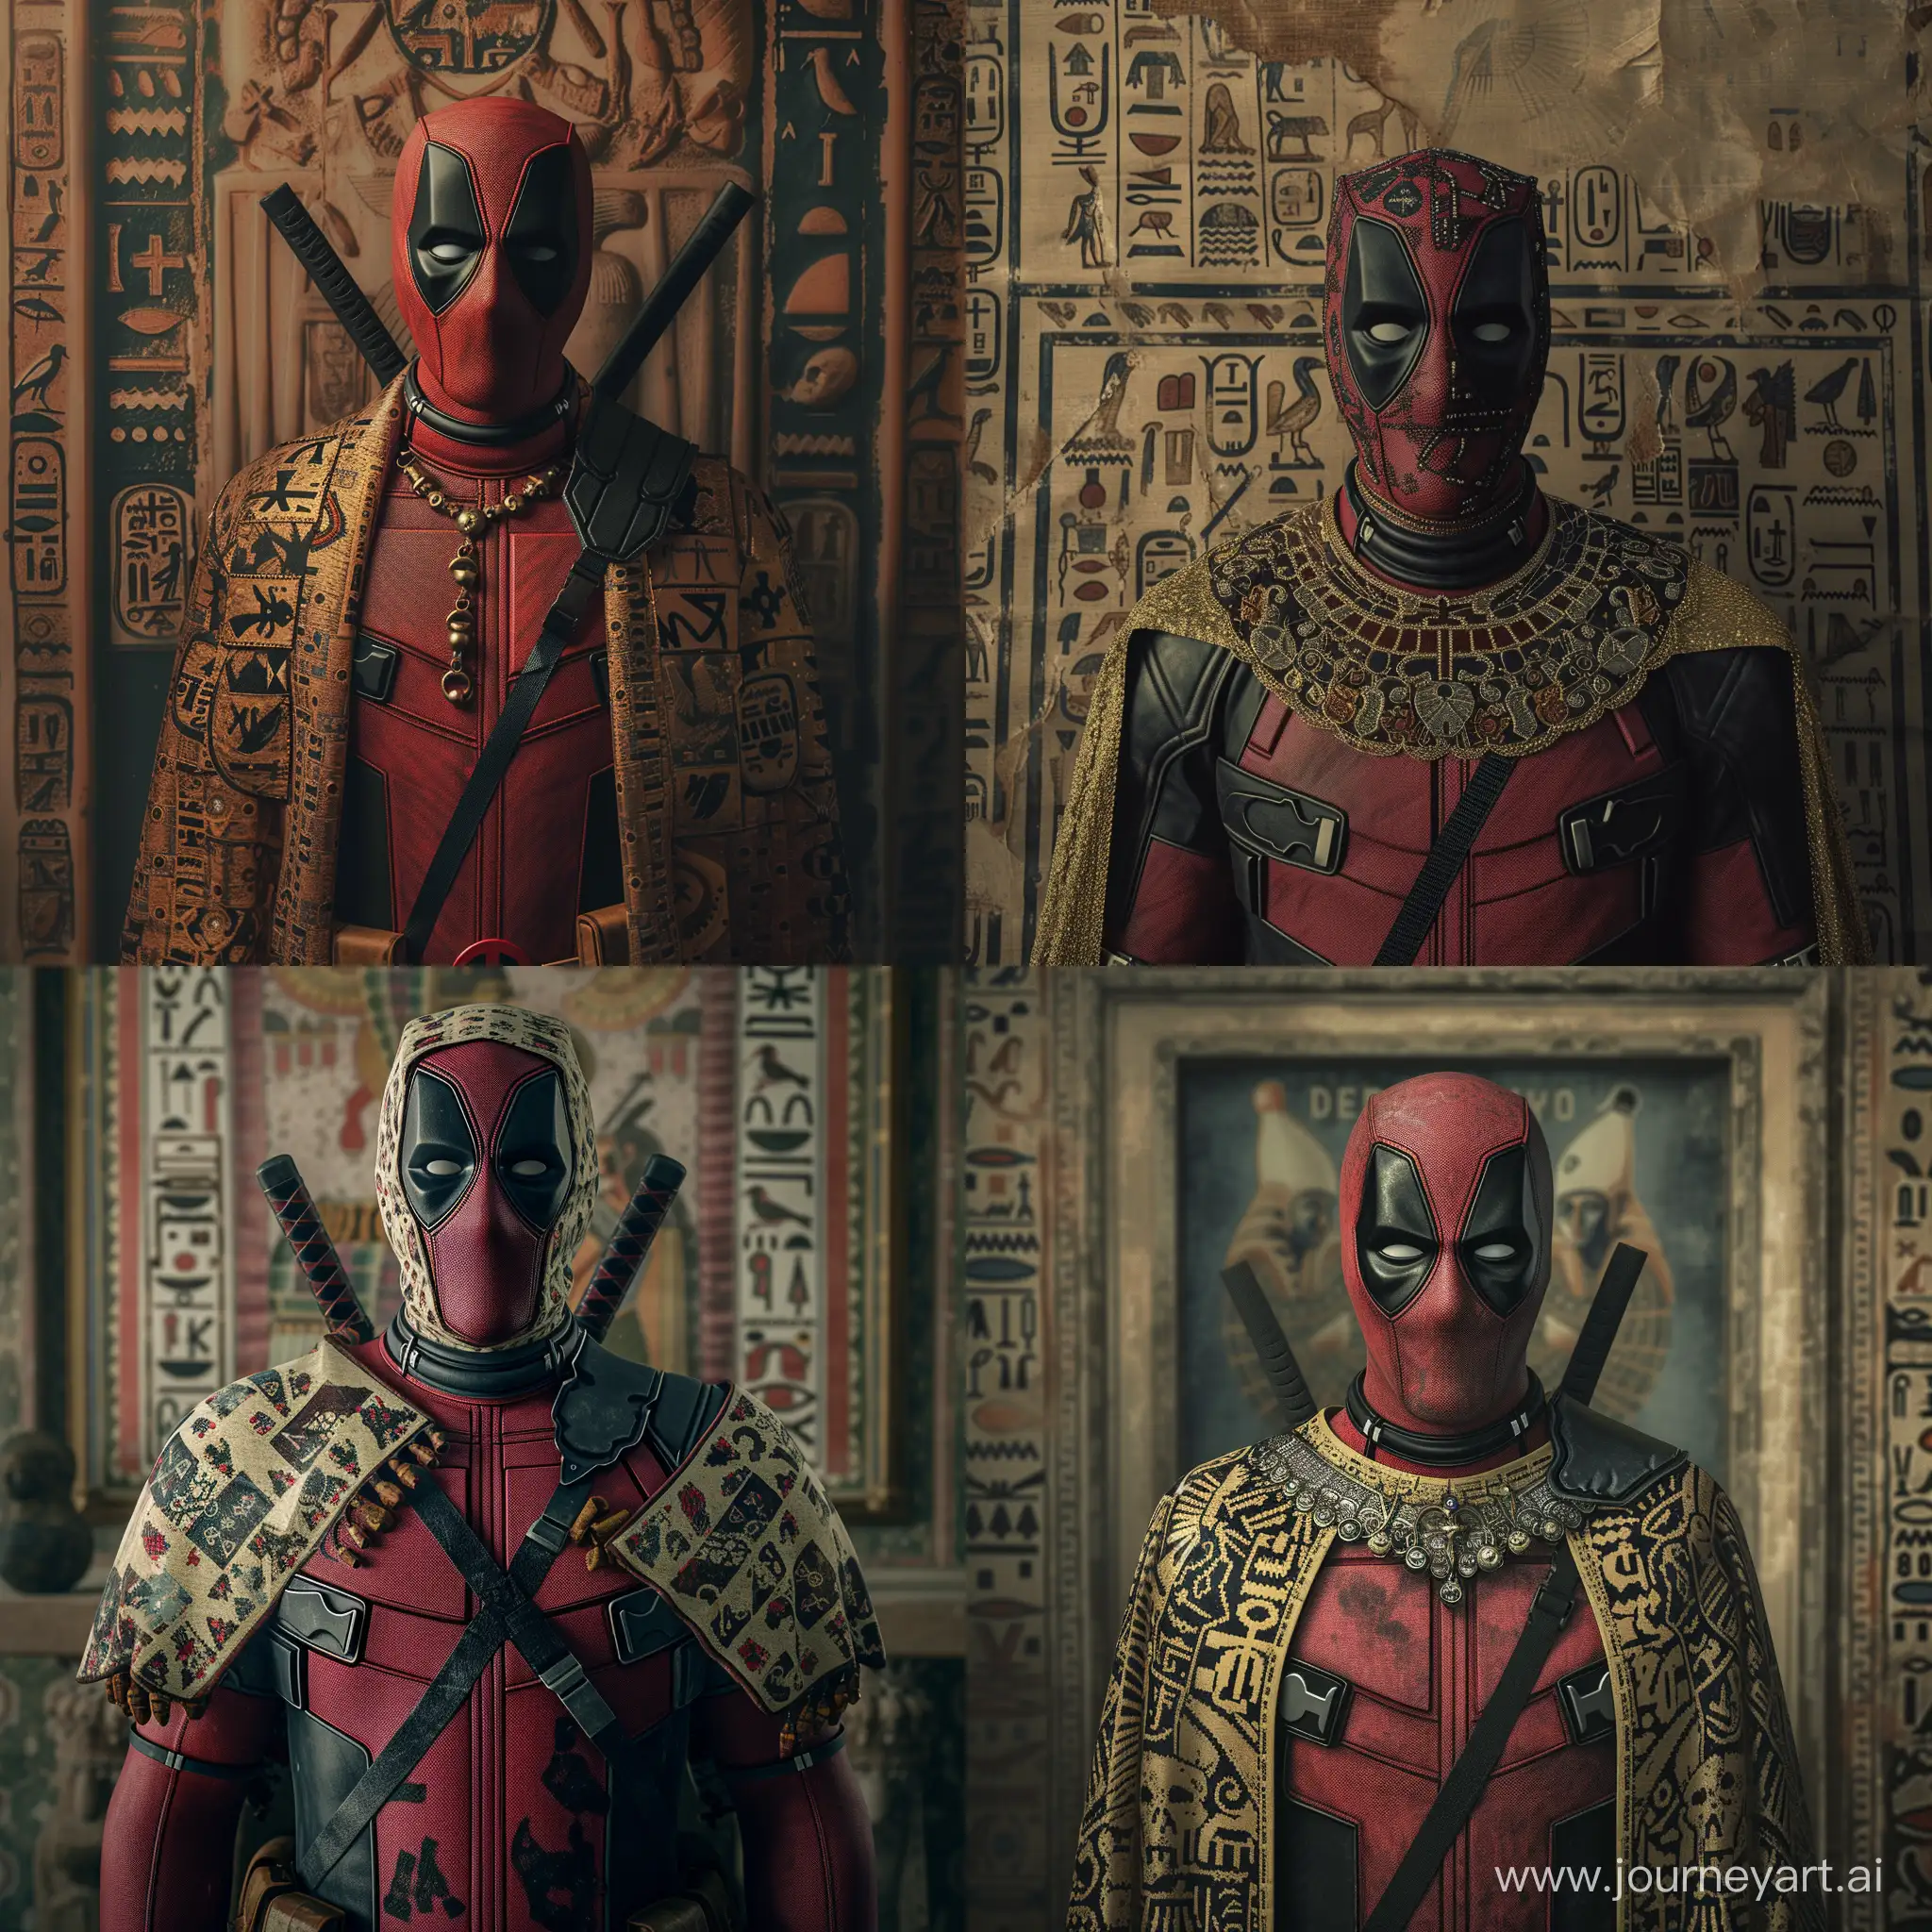 still of Deadpool  wearing a Deadpool suit from Renaissance era [Deadpool (80s)] Renaissance era, jewish glyphs, Egyptian rock paintings and symbols , Gucci, Versace, givenchy, film still from Renaissance era, Art of Sickness 666 art style Satanic horror, extremly detailed, insanely detailed and intricate, darkphilosophy, artofsickness666, and Nekro XIII, photograph, photoreal, 200mm, HD, f/2.0, highly detailed, accurate, 8k